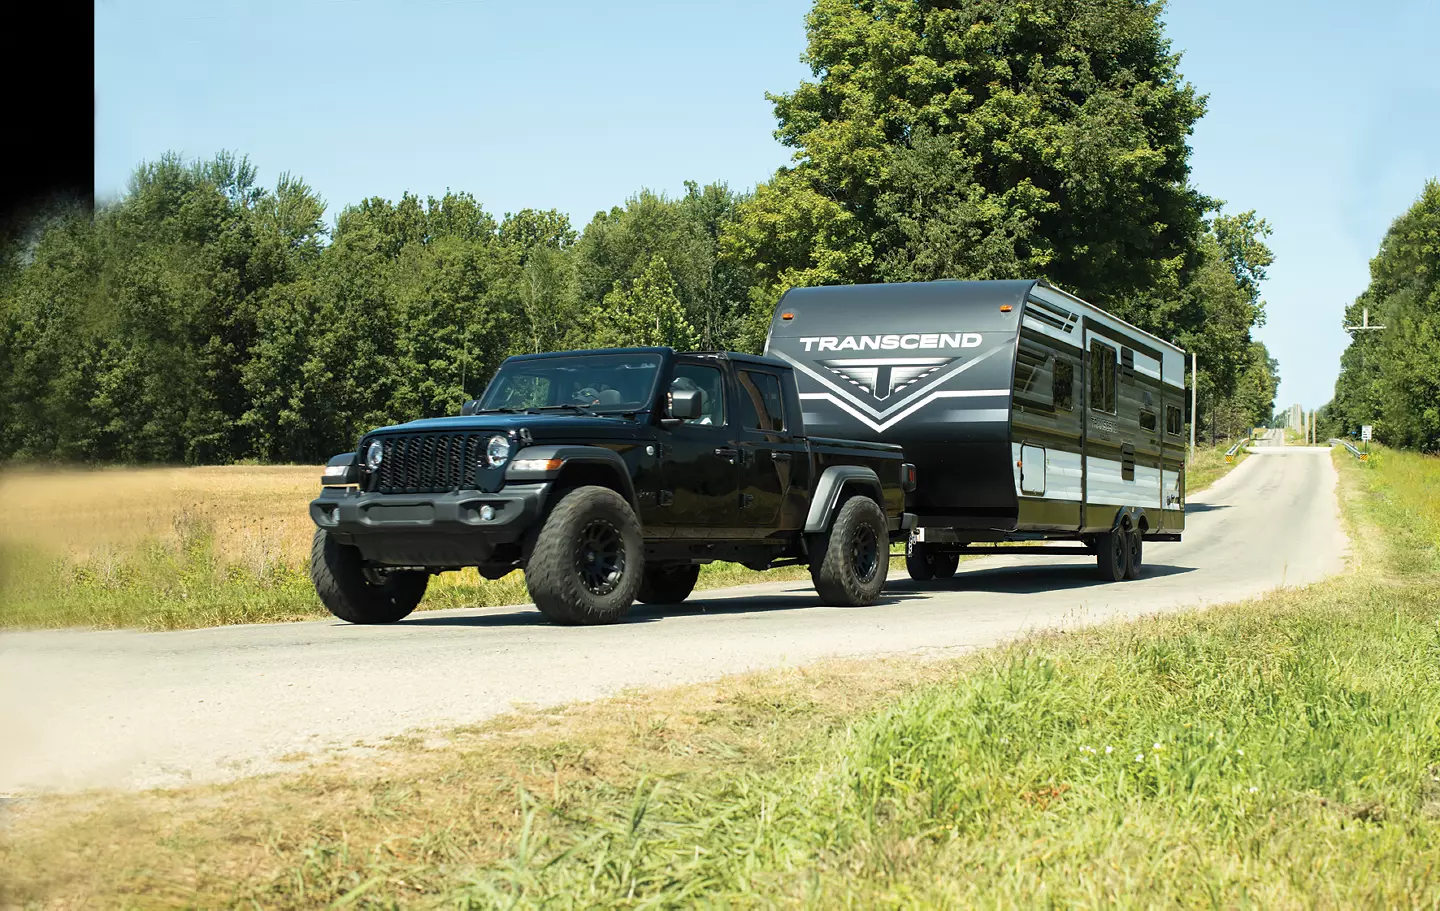 Transcend Xplor being towed by a Jeep in the country.